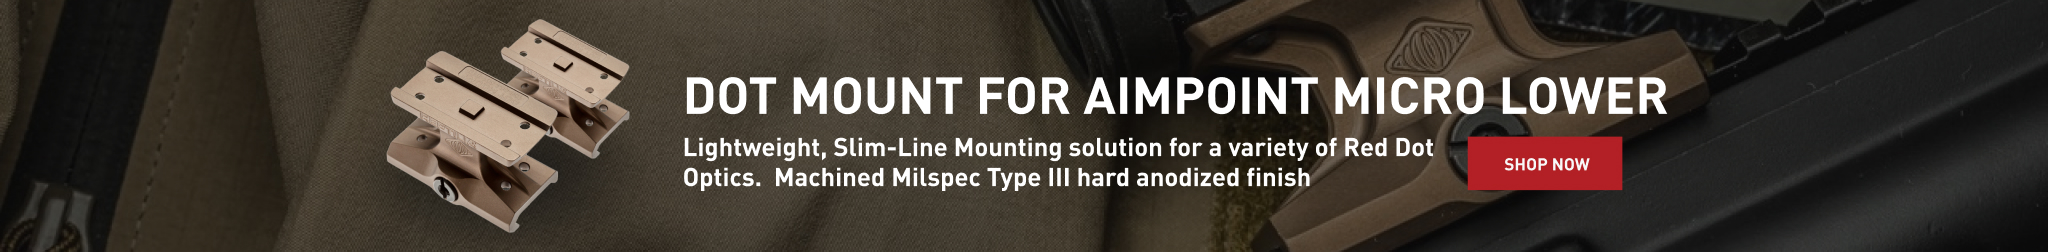 Dot Mount For Aimpoint Micro Optics